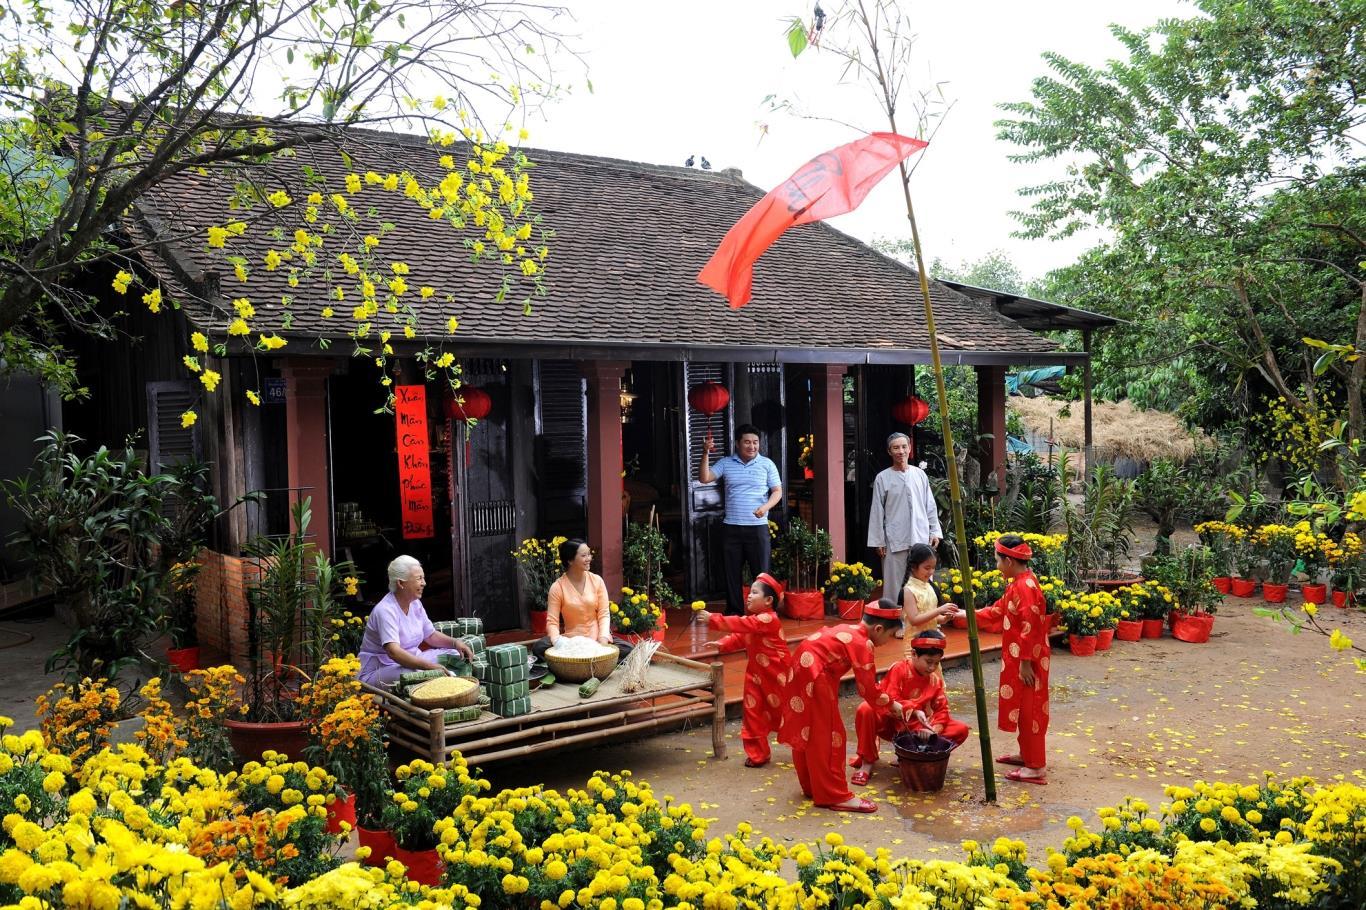 Tet is the most important national holiday in Vietnam